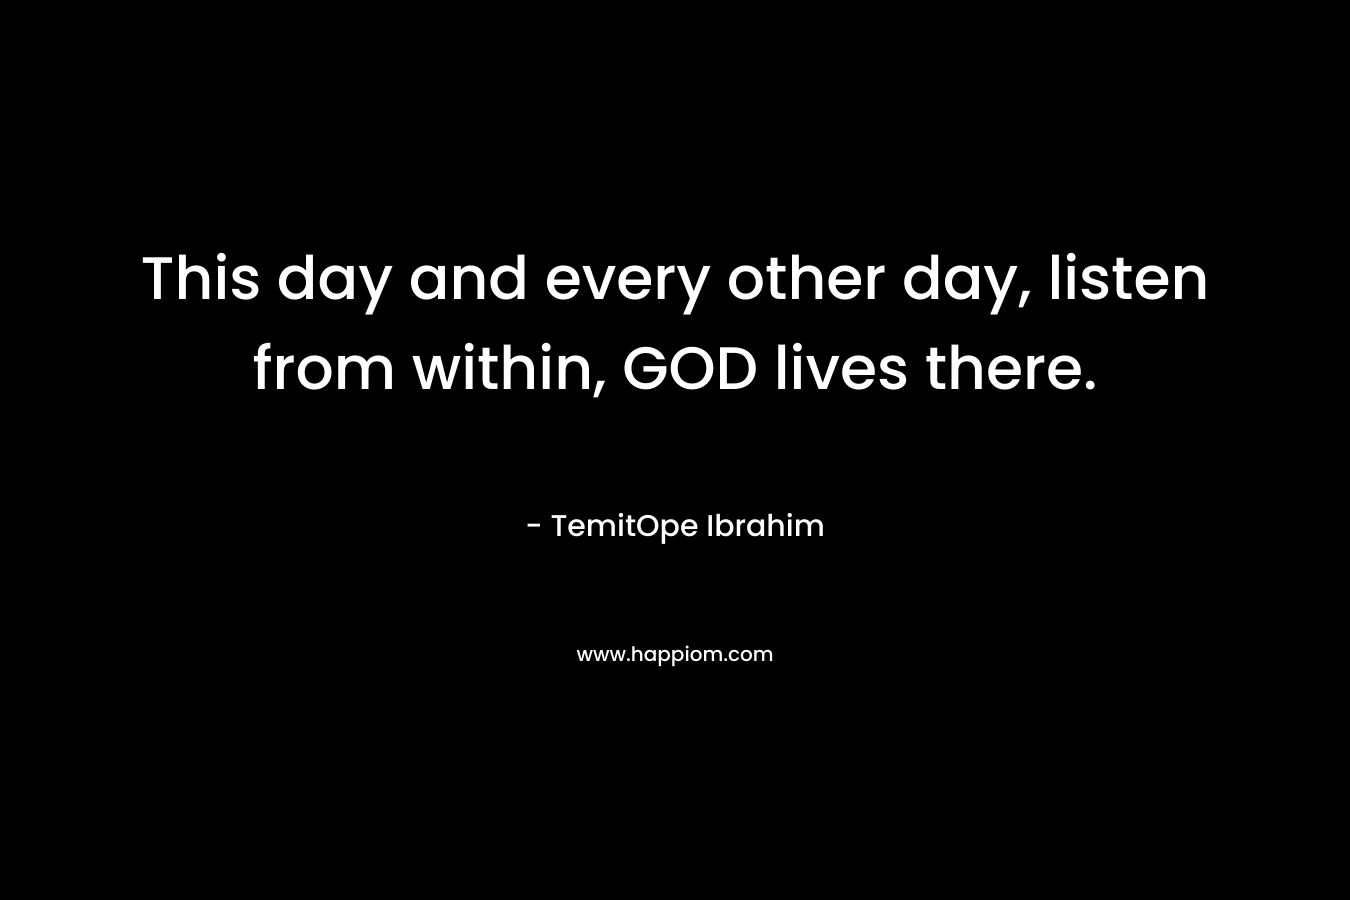 This day and every other day, listen from within, GOD lives there.